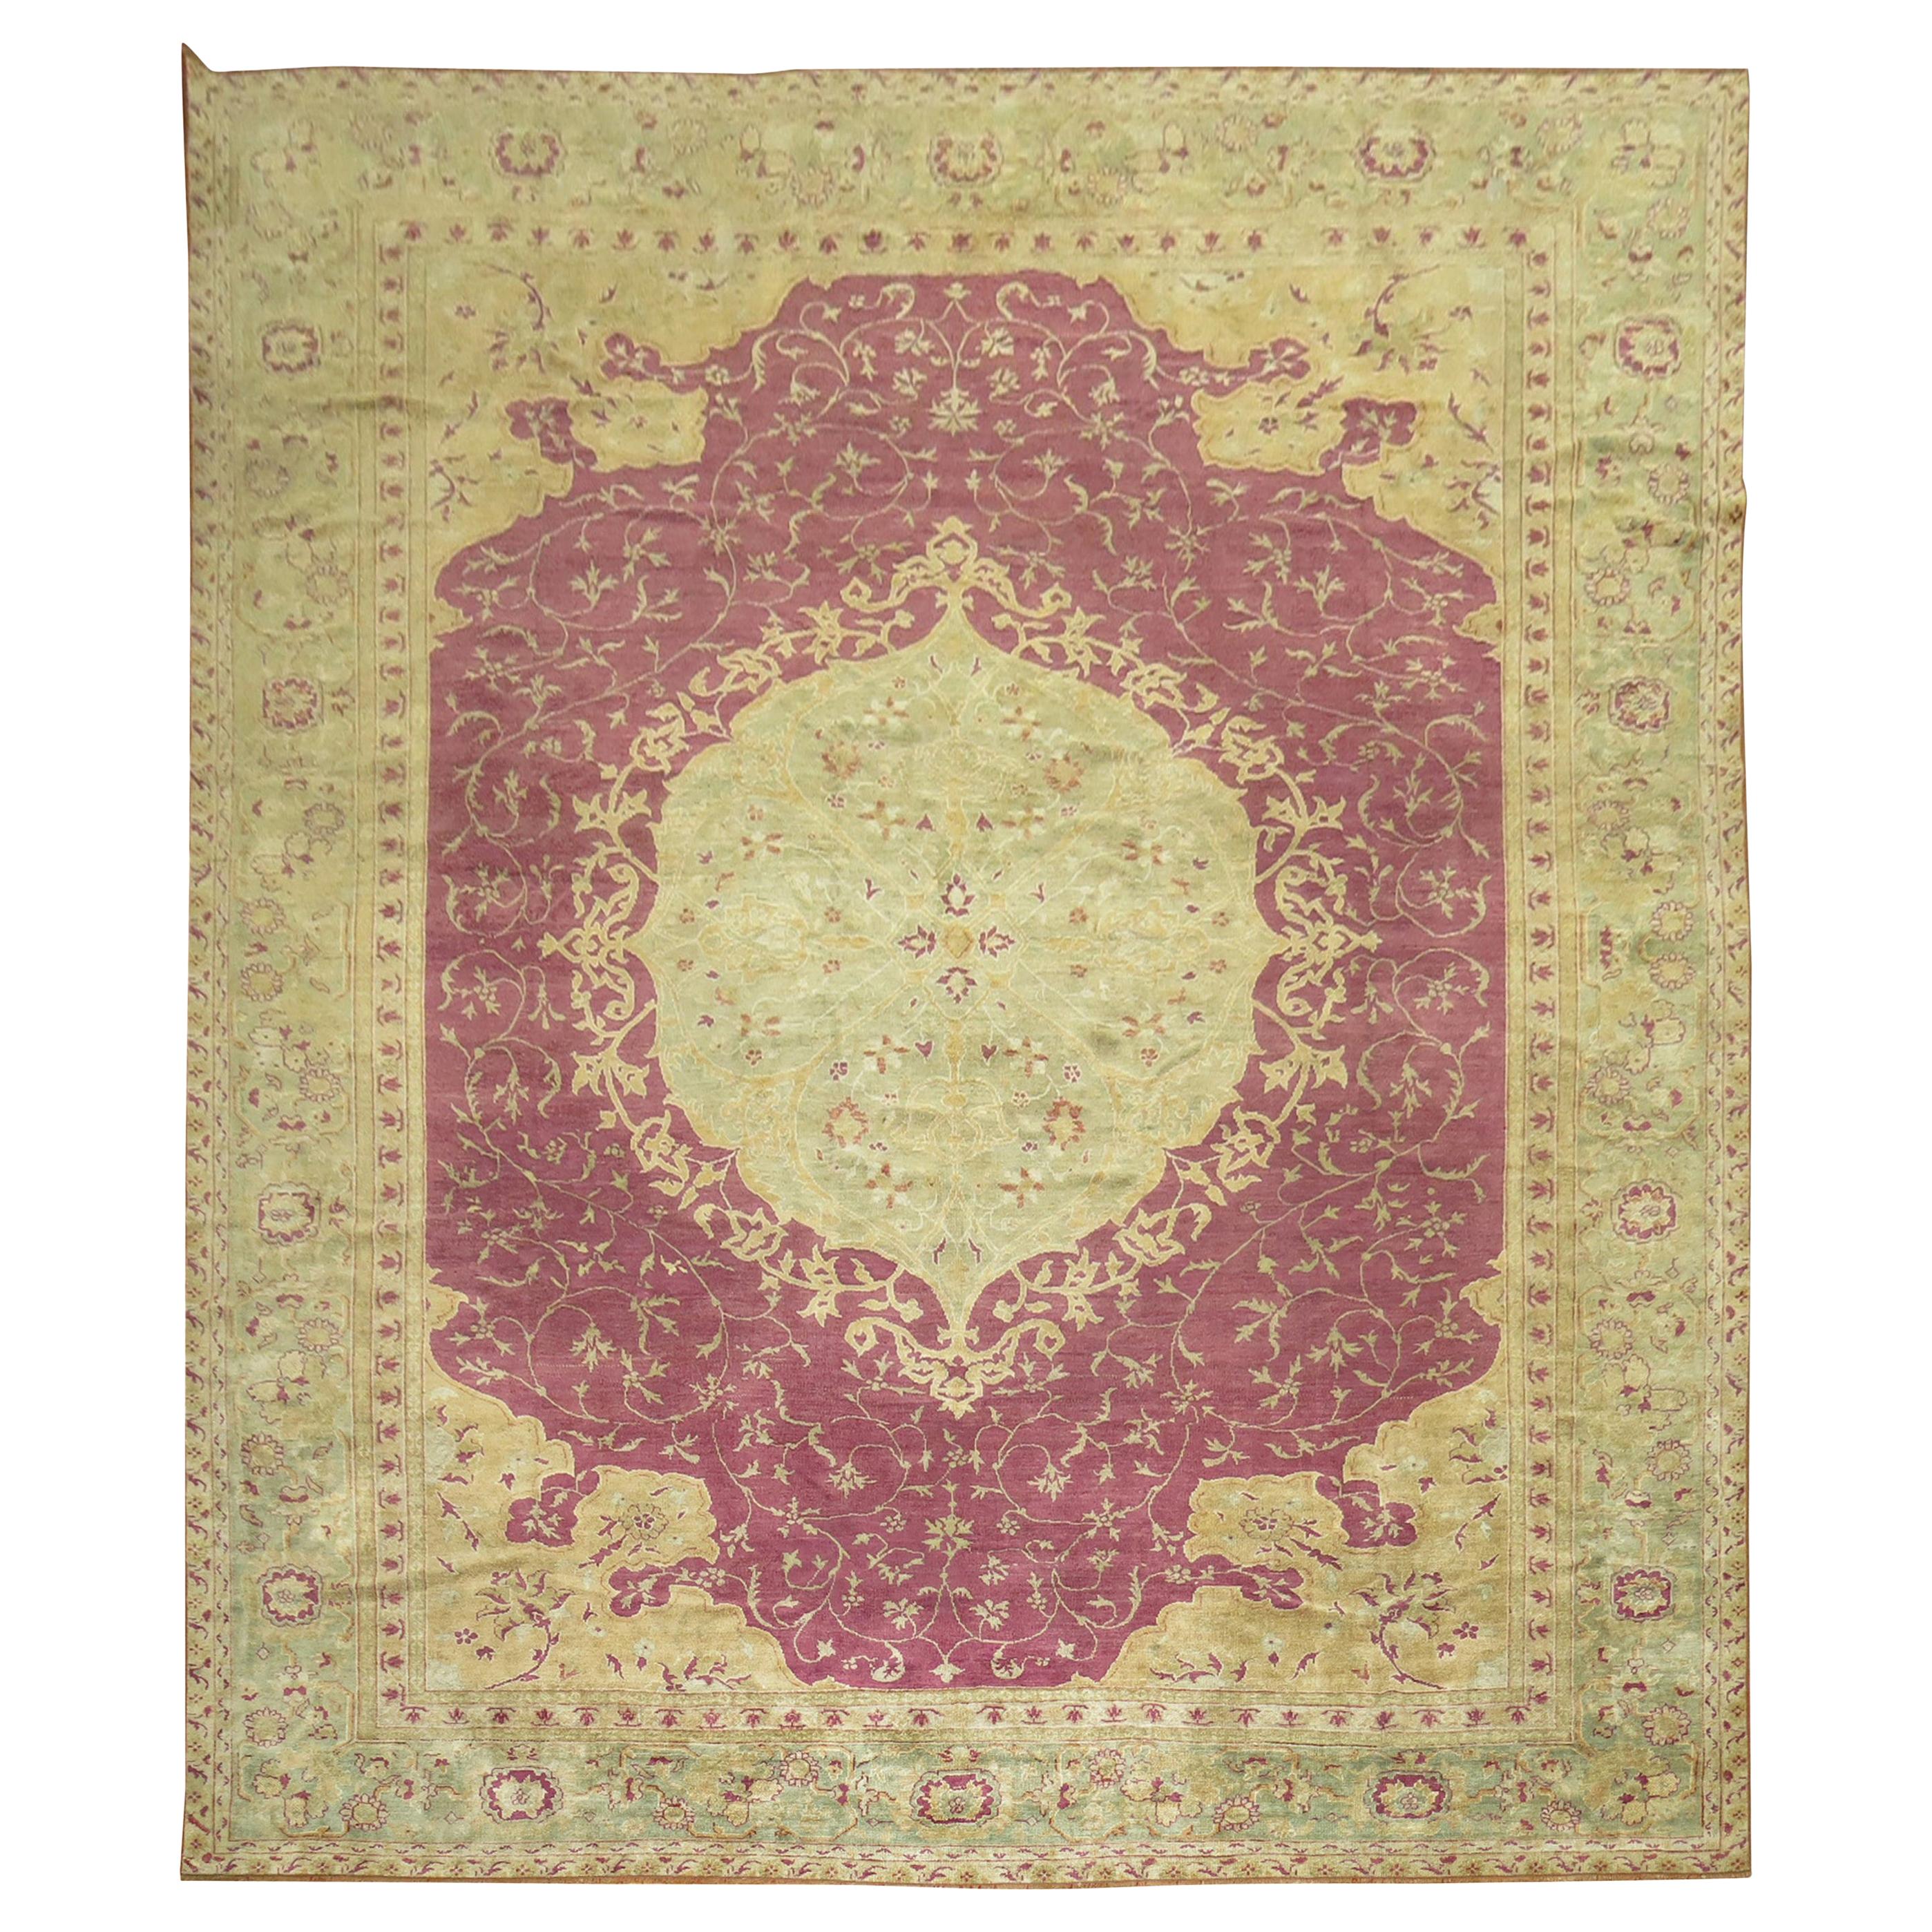 Plum Color Early 20th Century Antique Turkish Ghiordes Rug For Sale